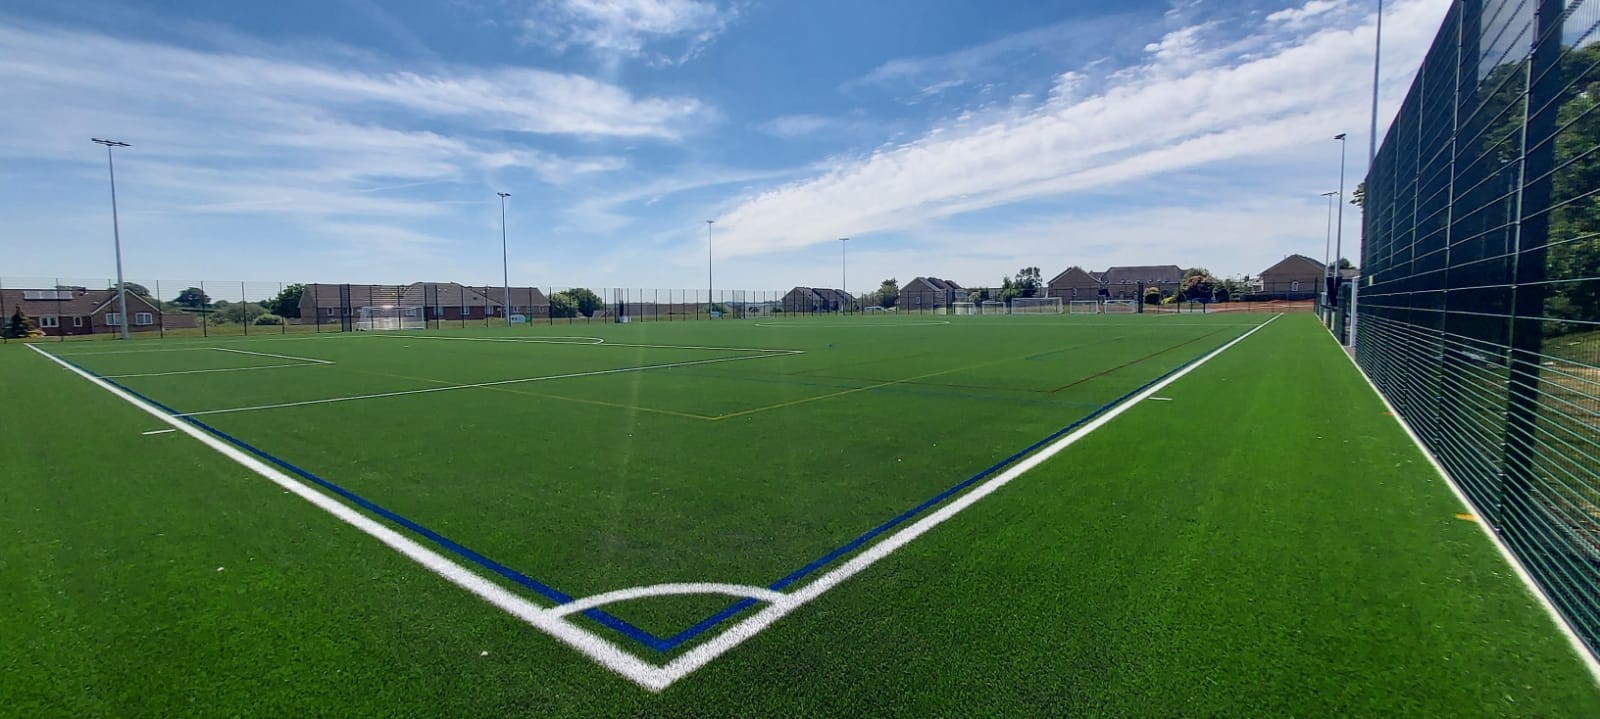 Image of Halstead artificial football pitch from the corner.